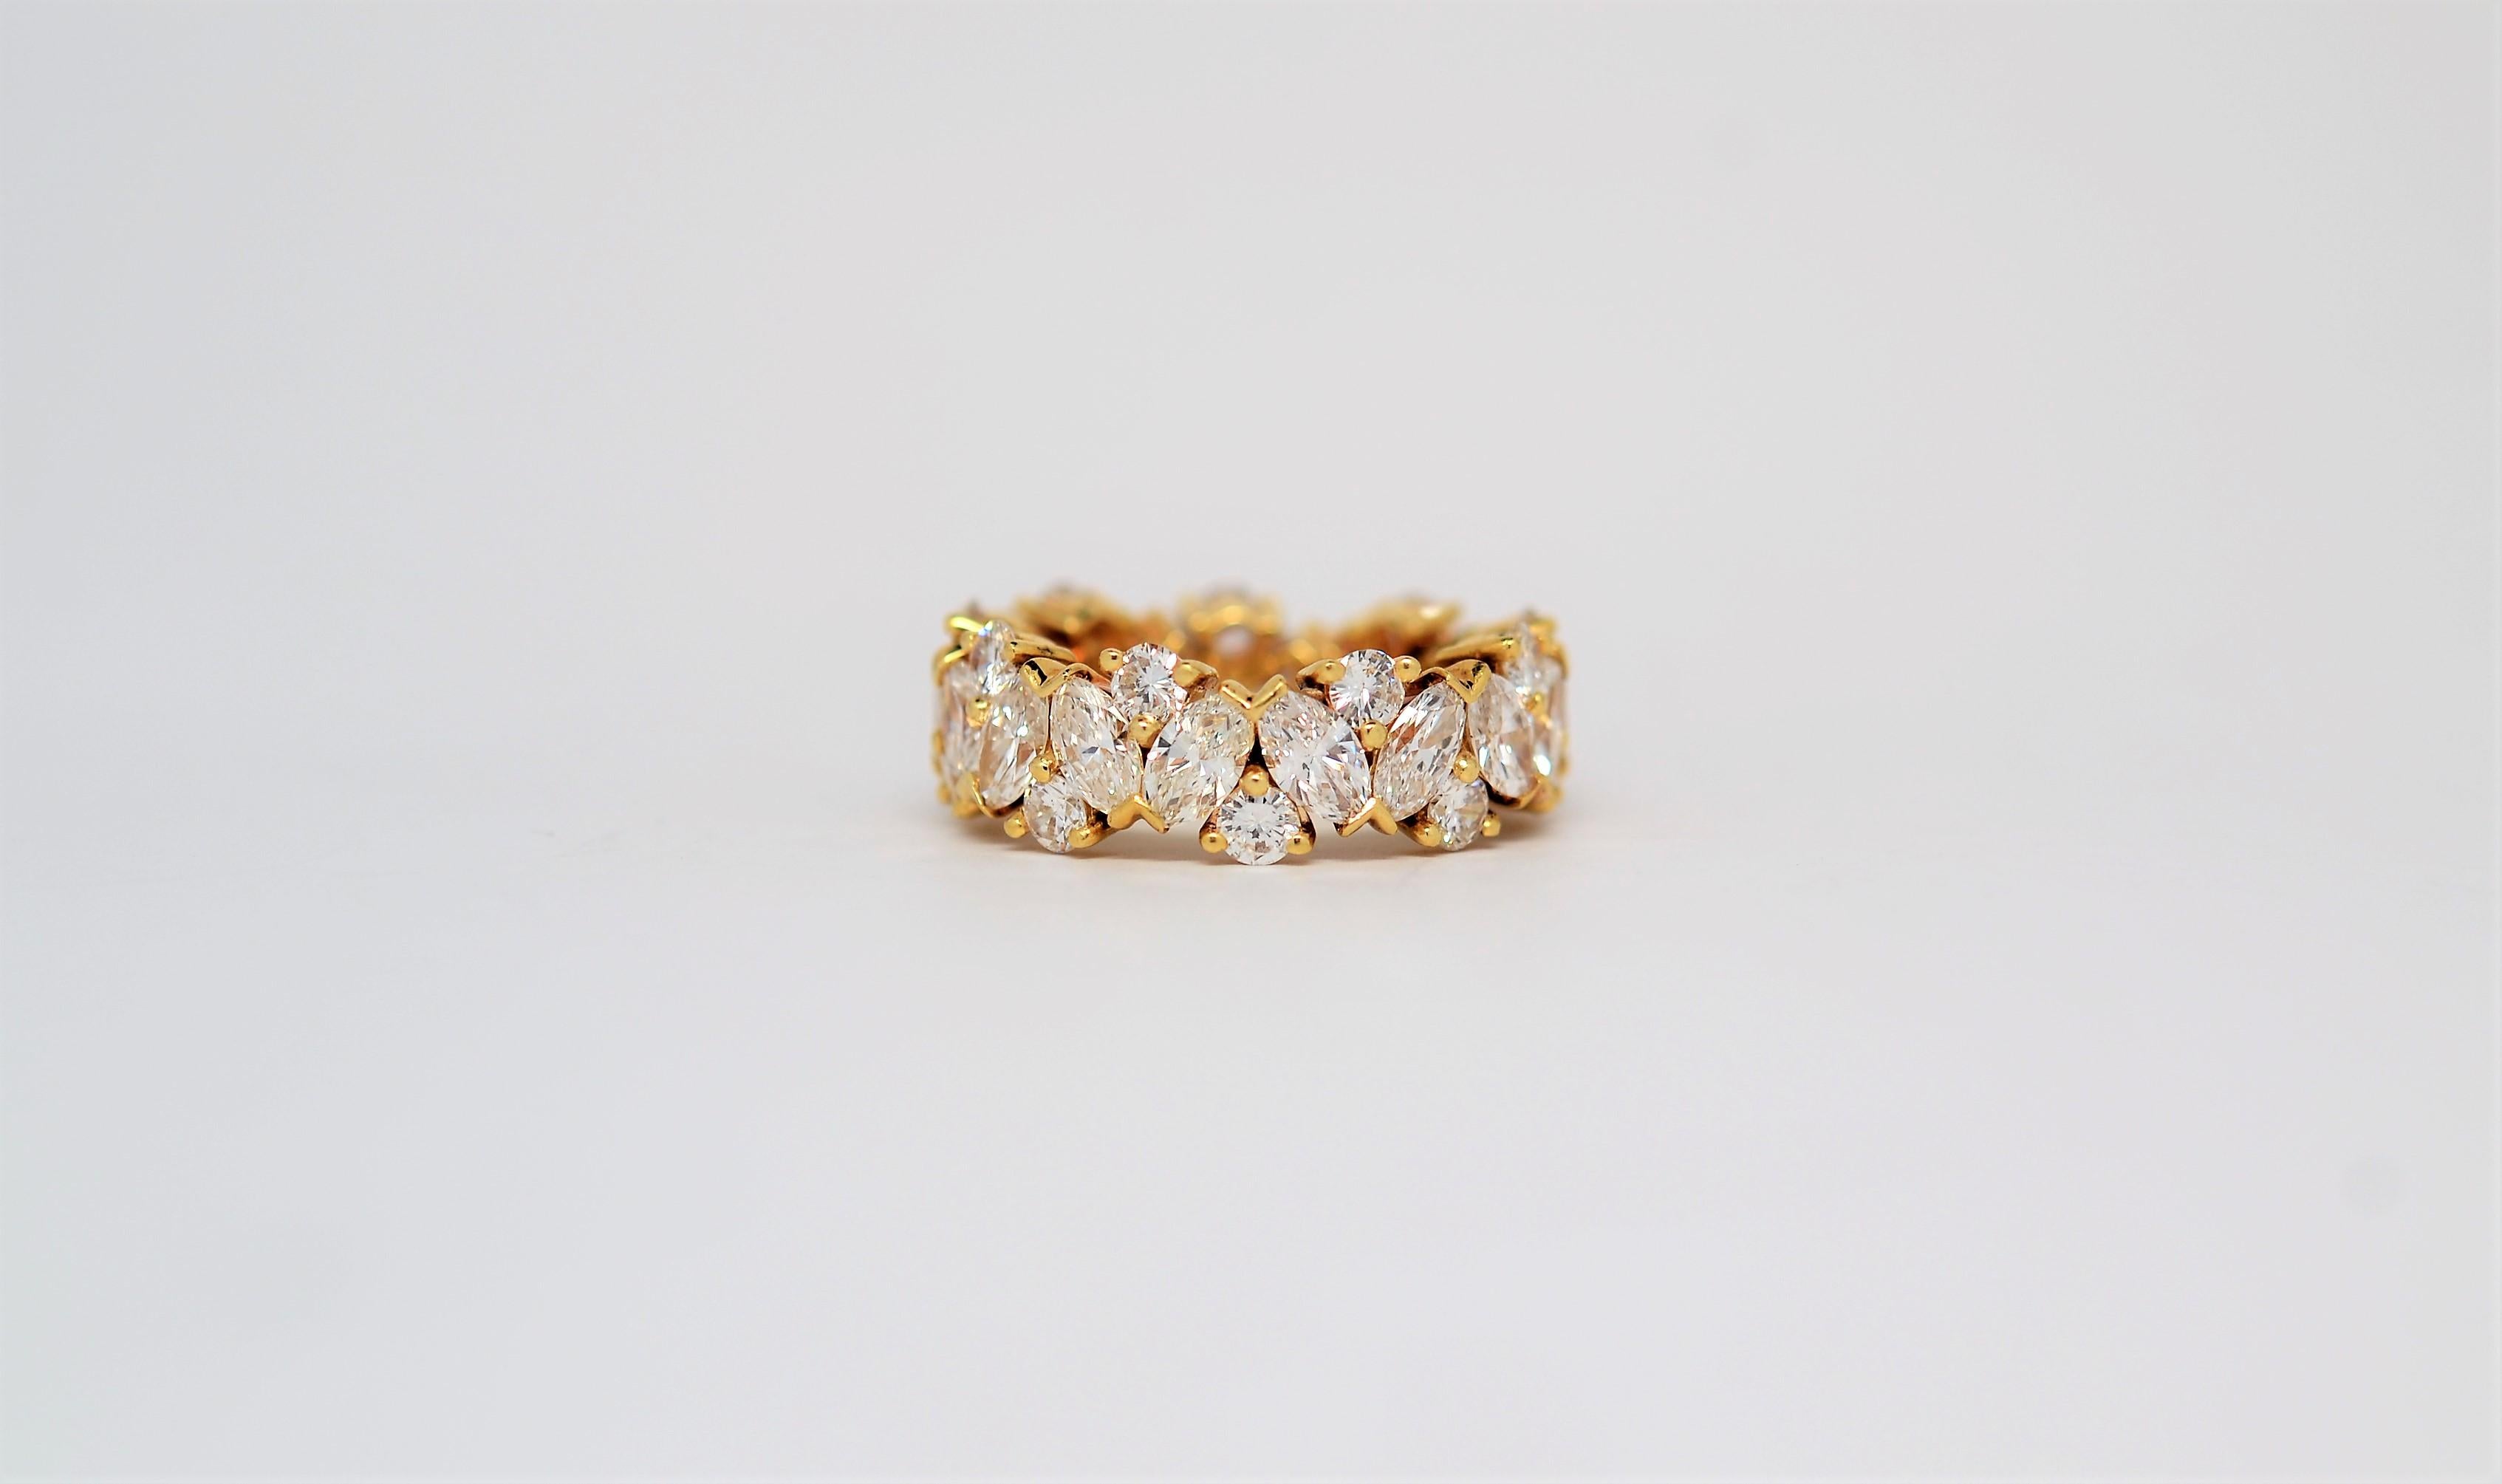 A finely crafted and handmade 18K Yellow Gold Ring set with Marquise Brilliant Cut and Round Brilliant Cut Diamonds. The ring is set all the way around in an eternity layout with offset Marquise Brilliant Cut Diamonds using shared Chevron tips.